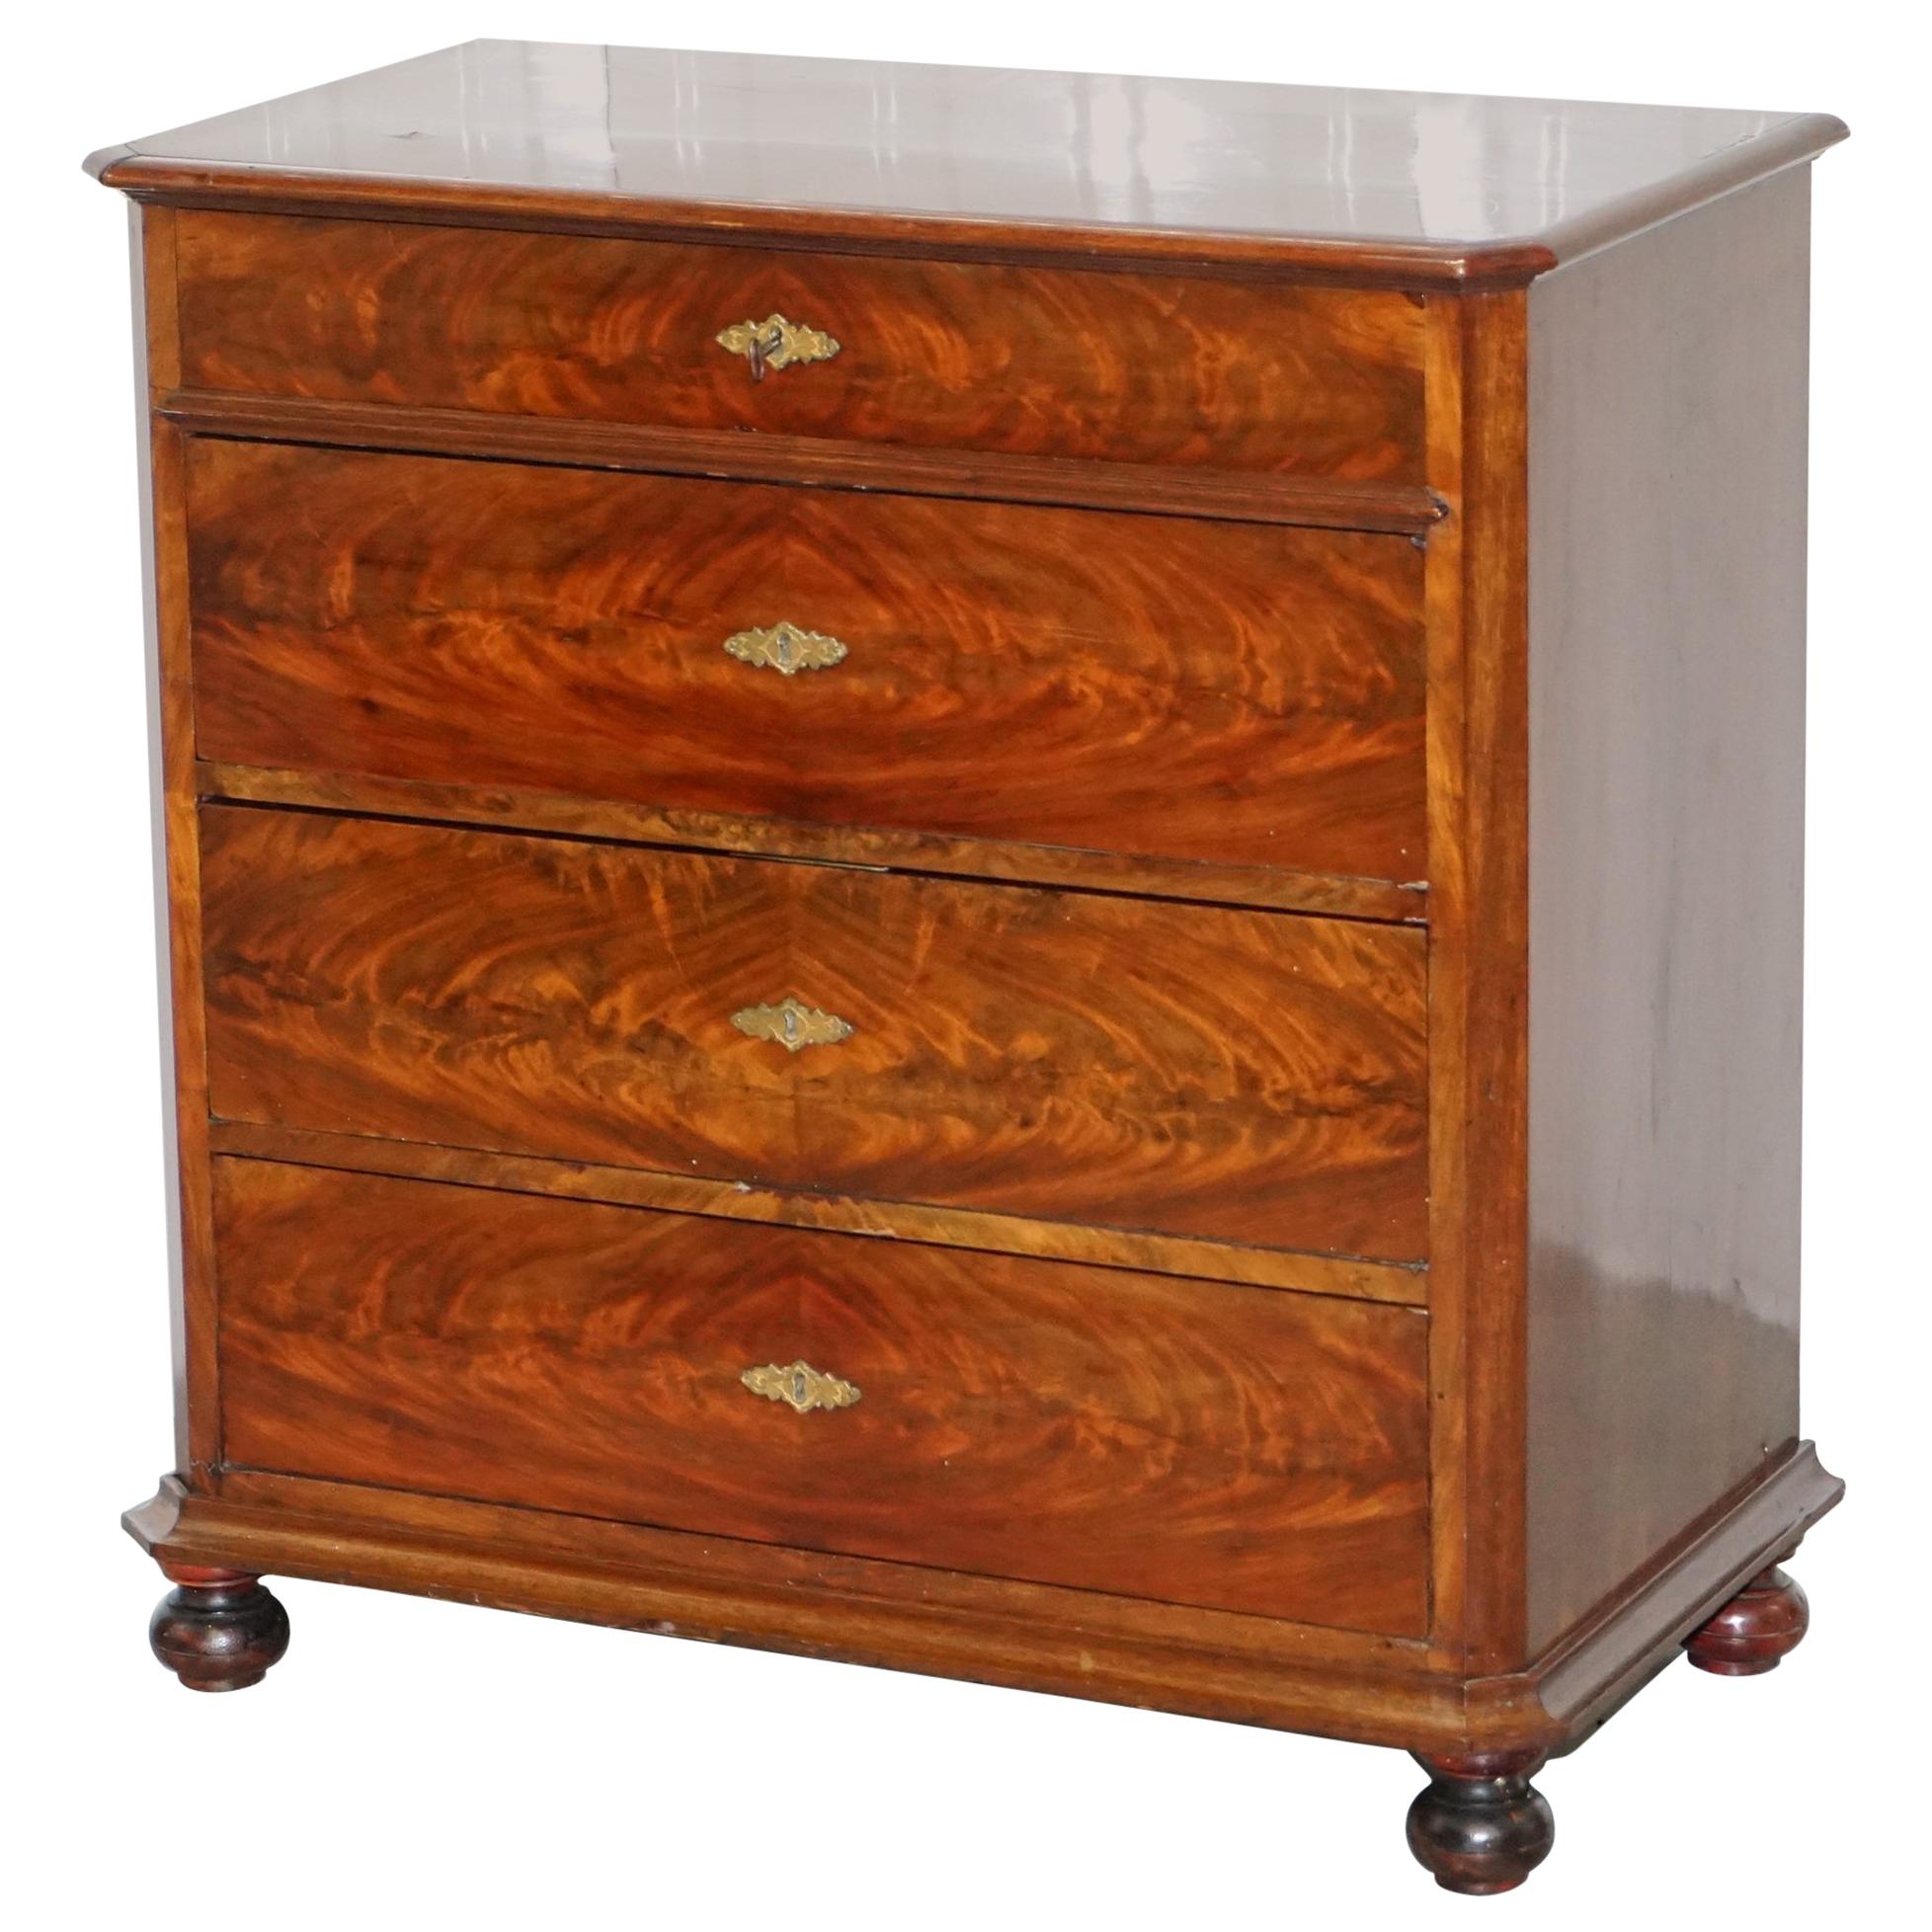 Stunning Biedermeier Flamed Mahogany Small Chest of Drawers Rare Find circa 1820